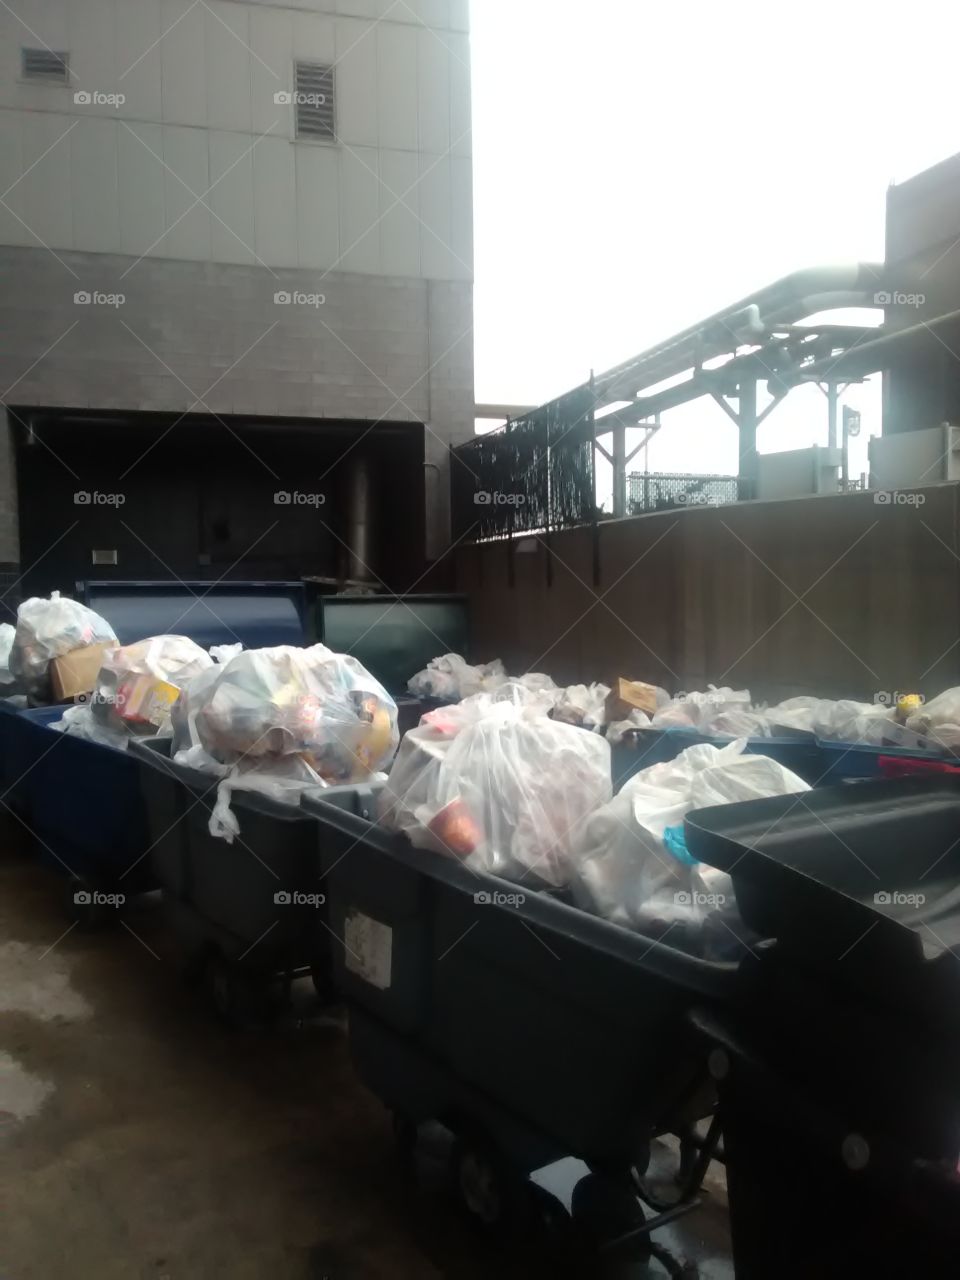 Clean Up at the Stadium